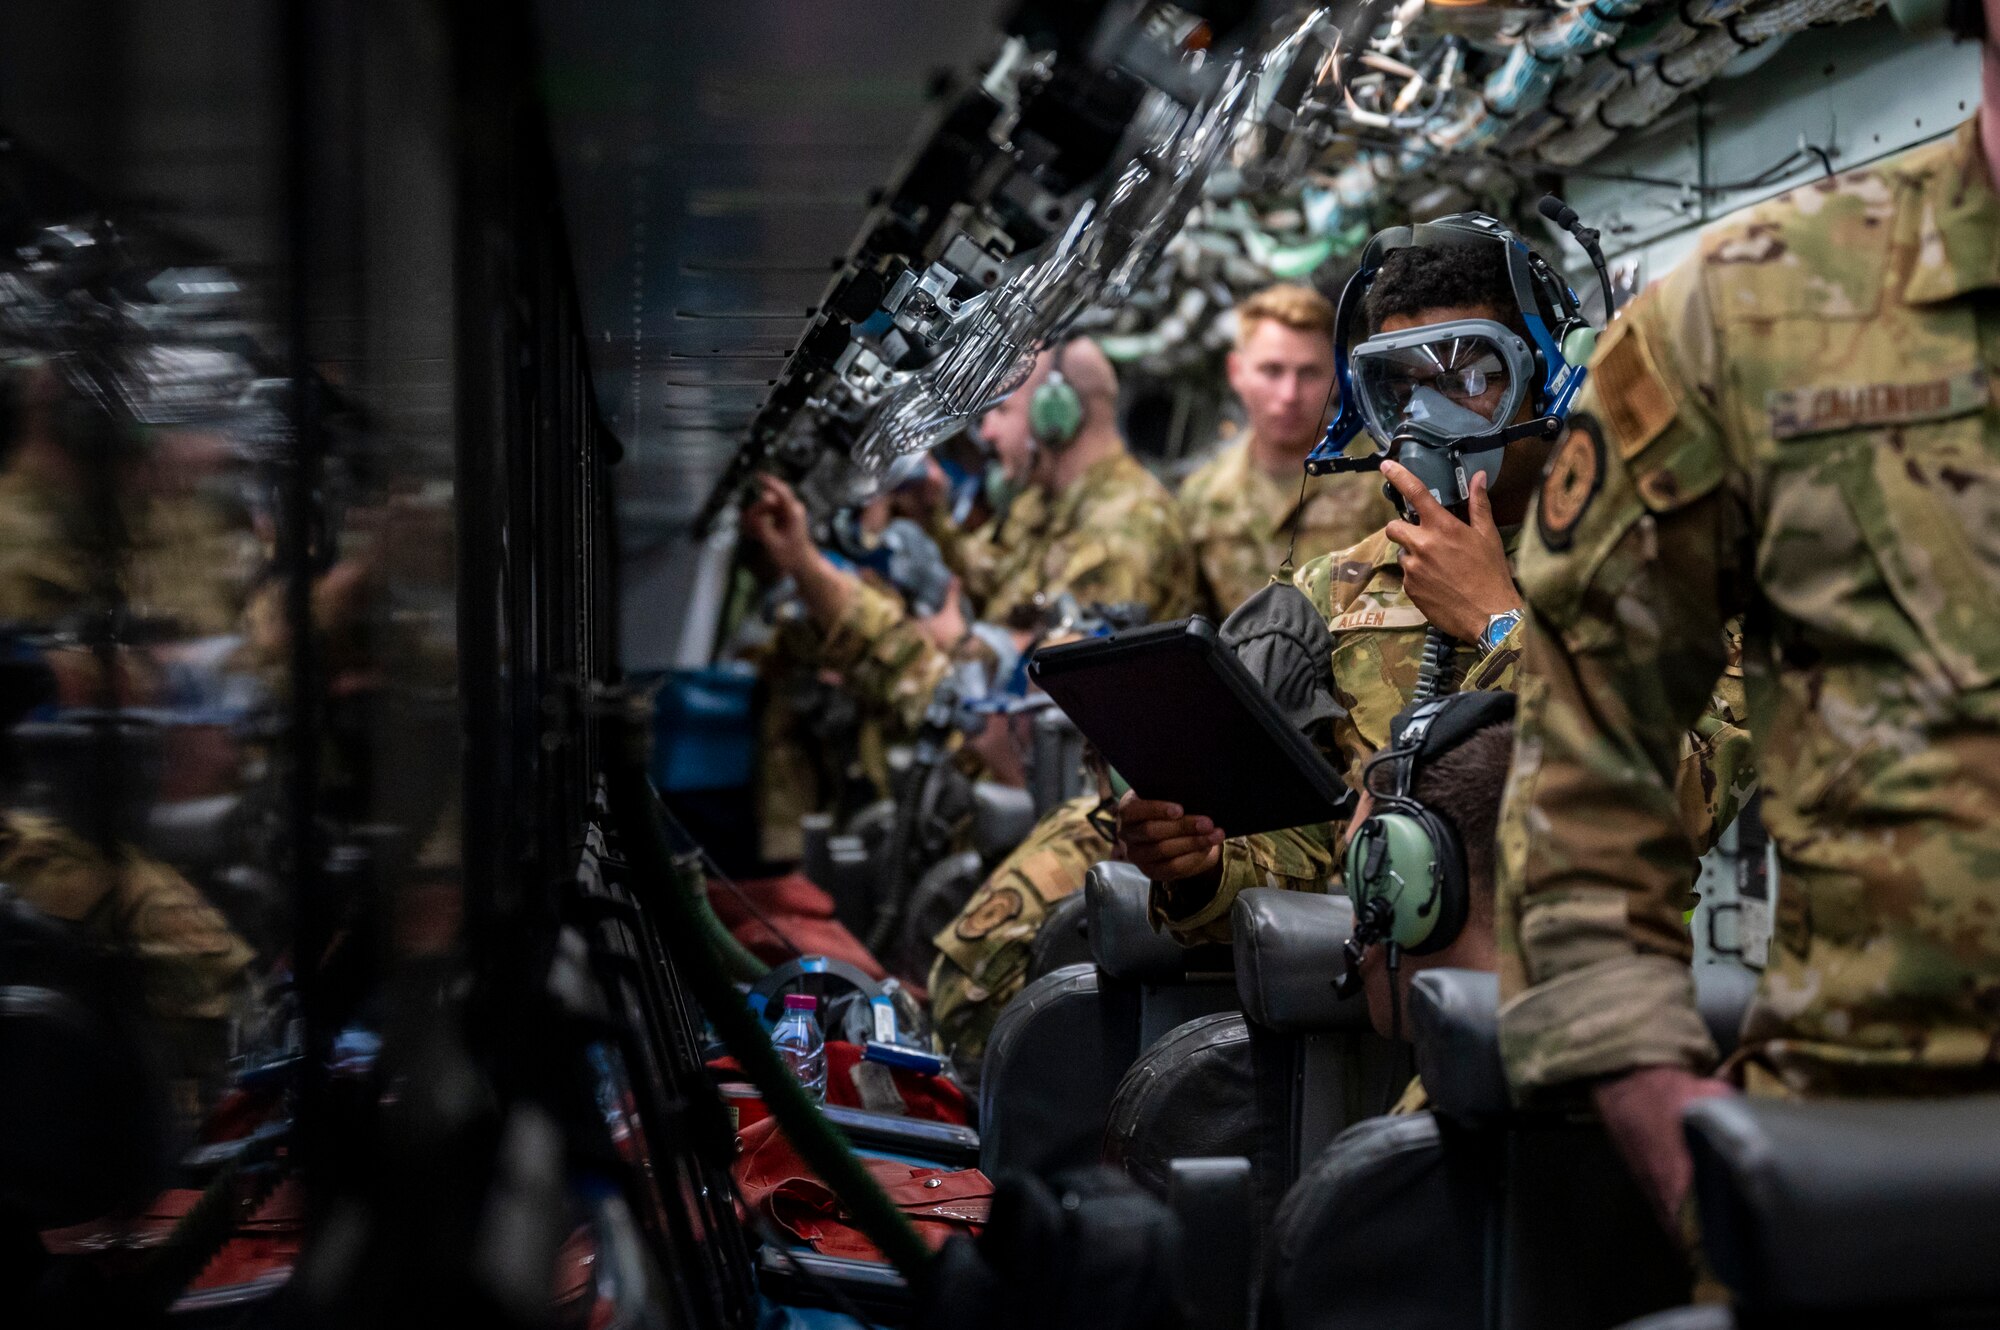 Service members in an aircraft